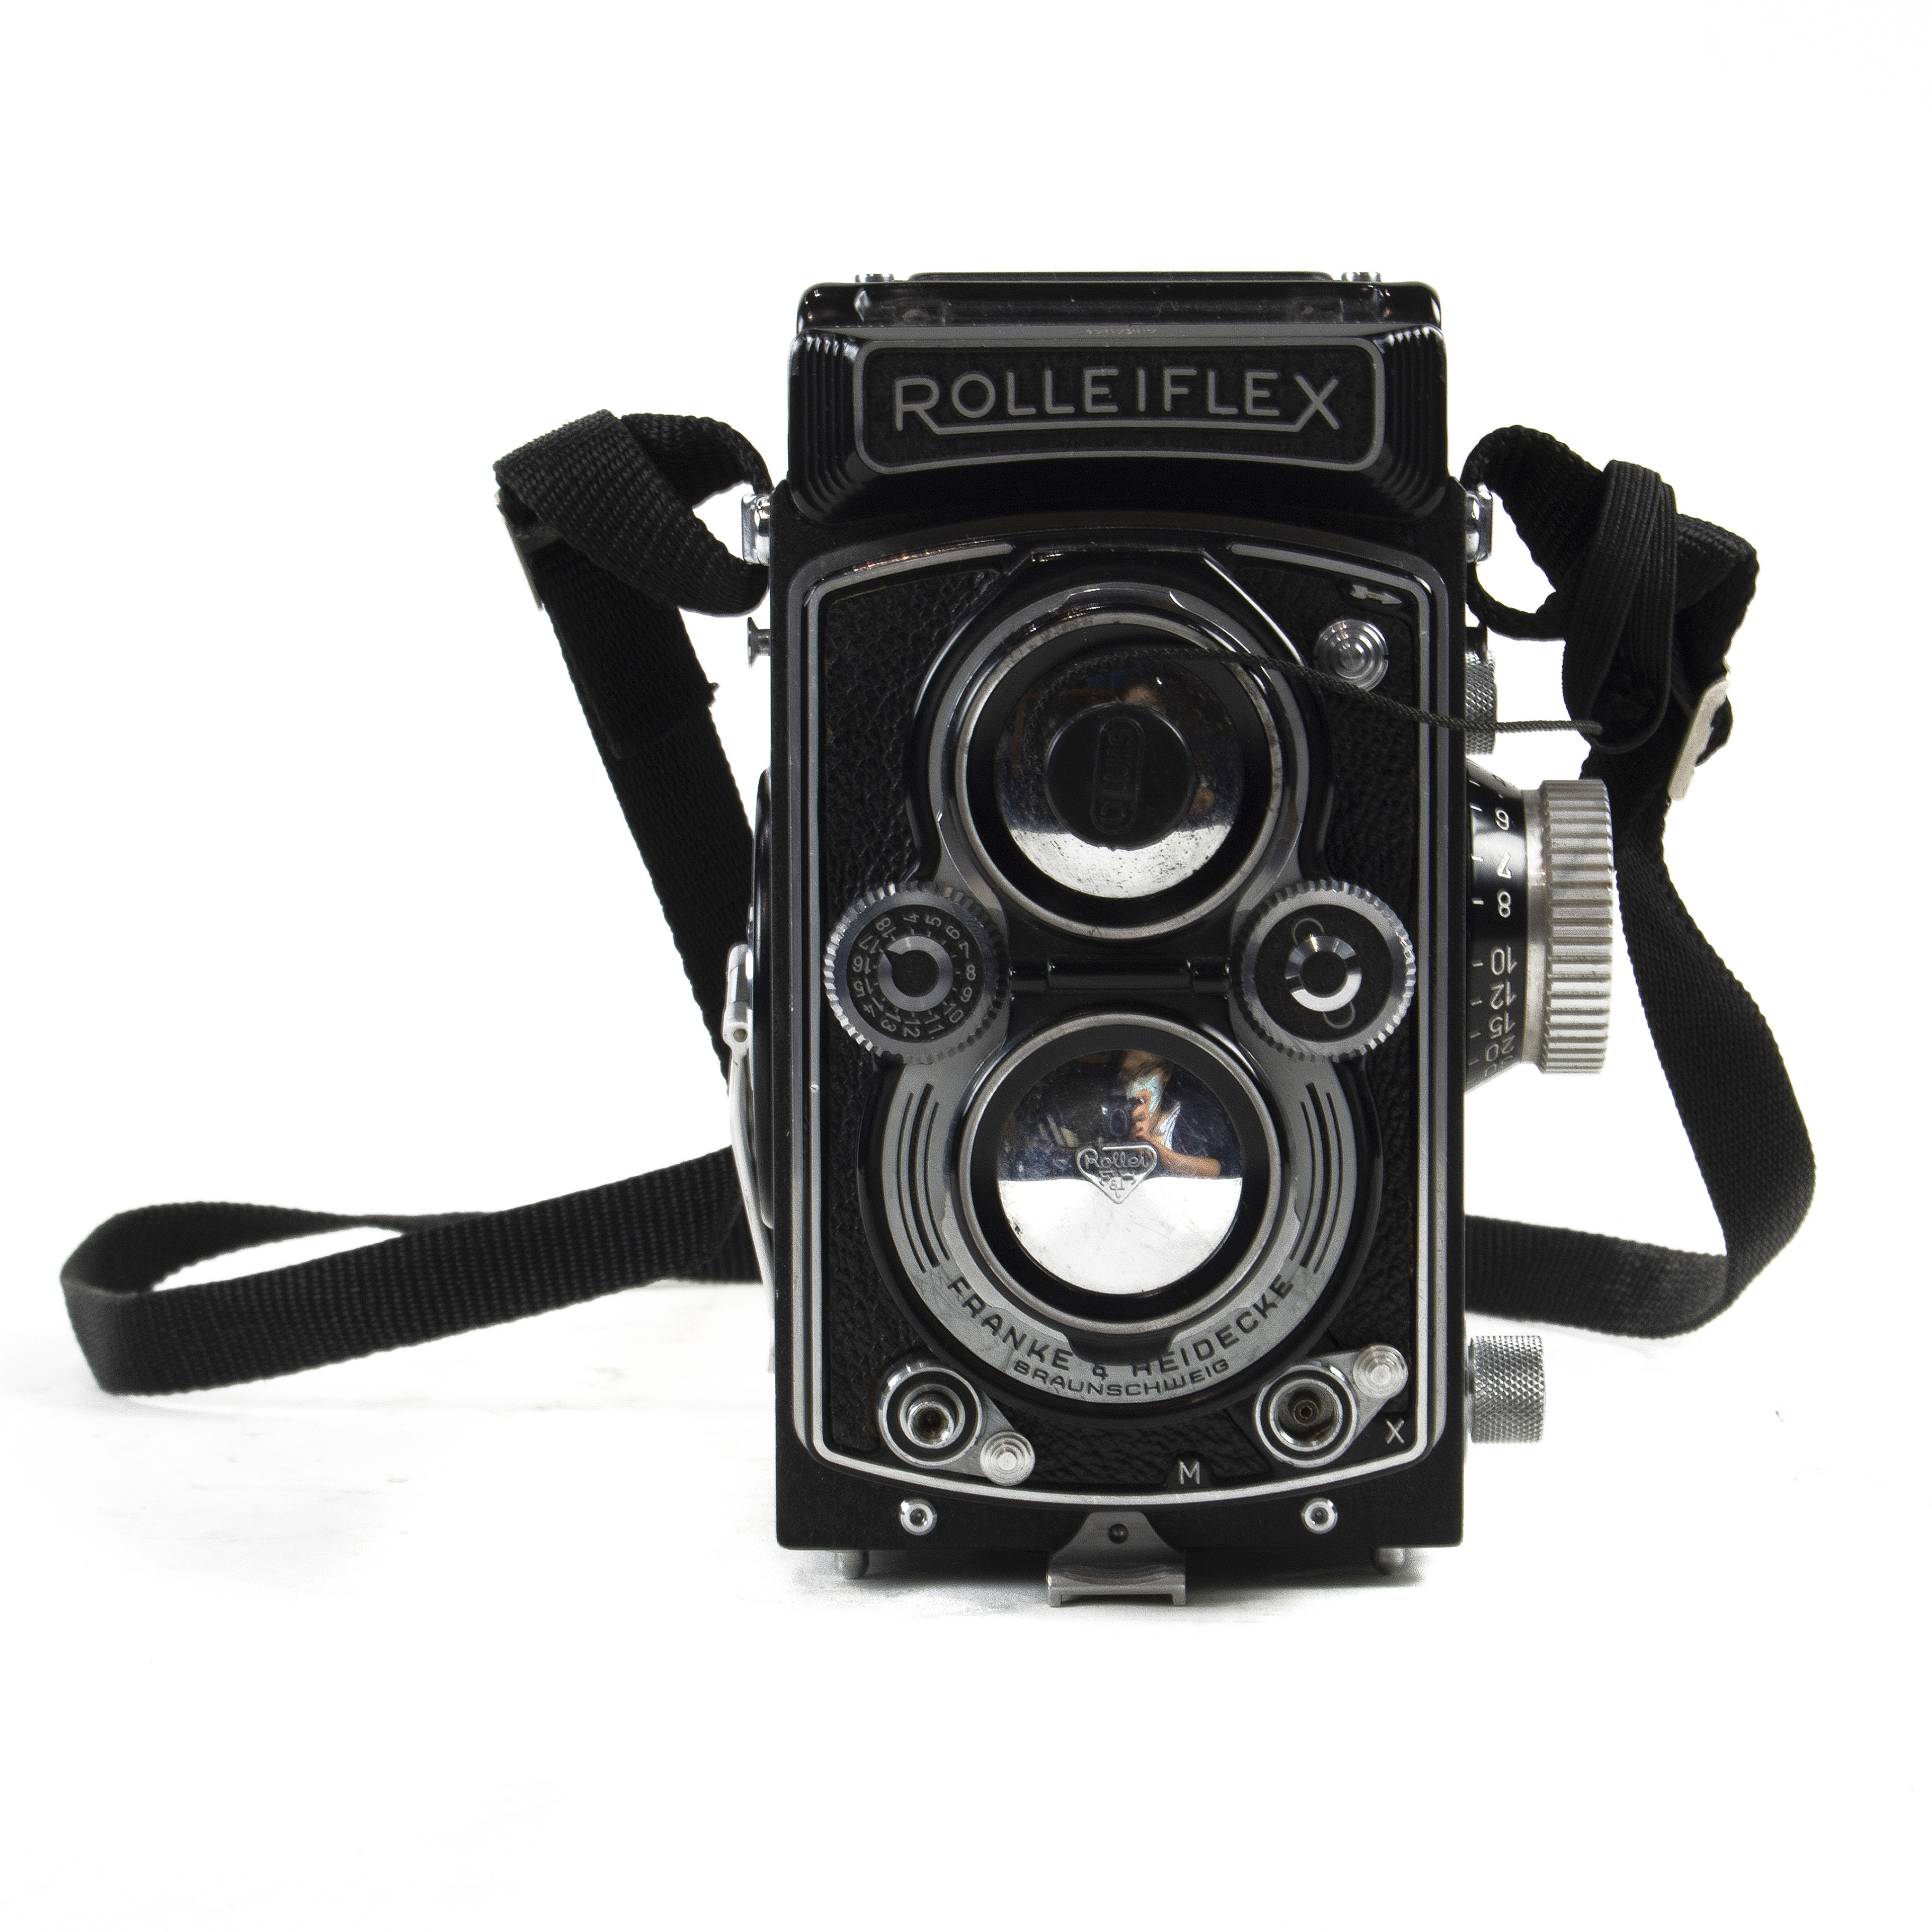 A ROLLEIFLEX 2.8F TLR CAMERA WITH